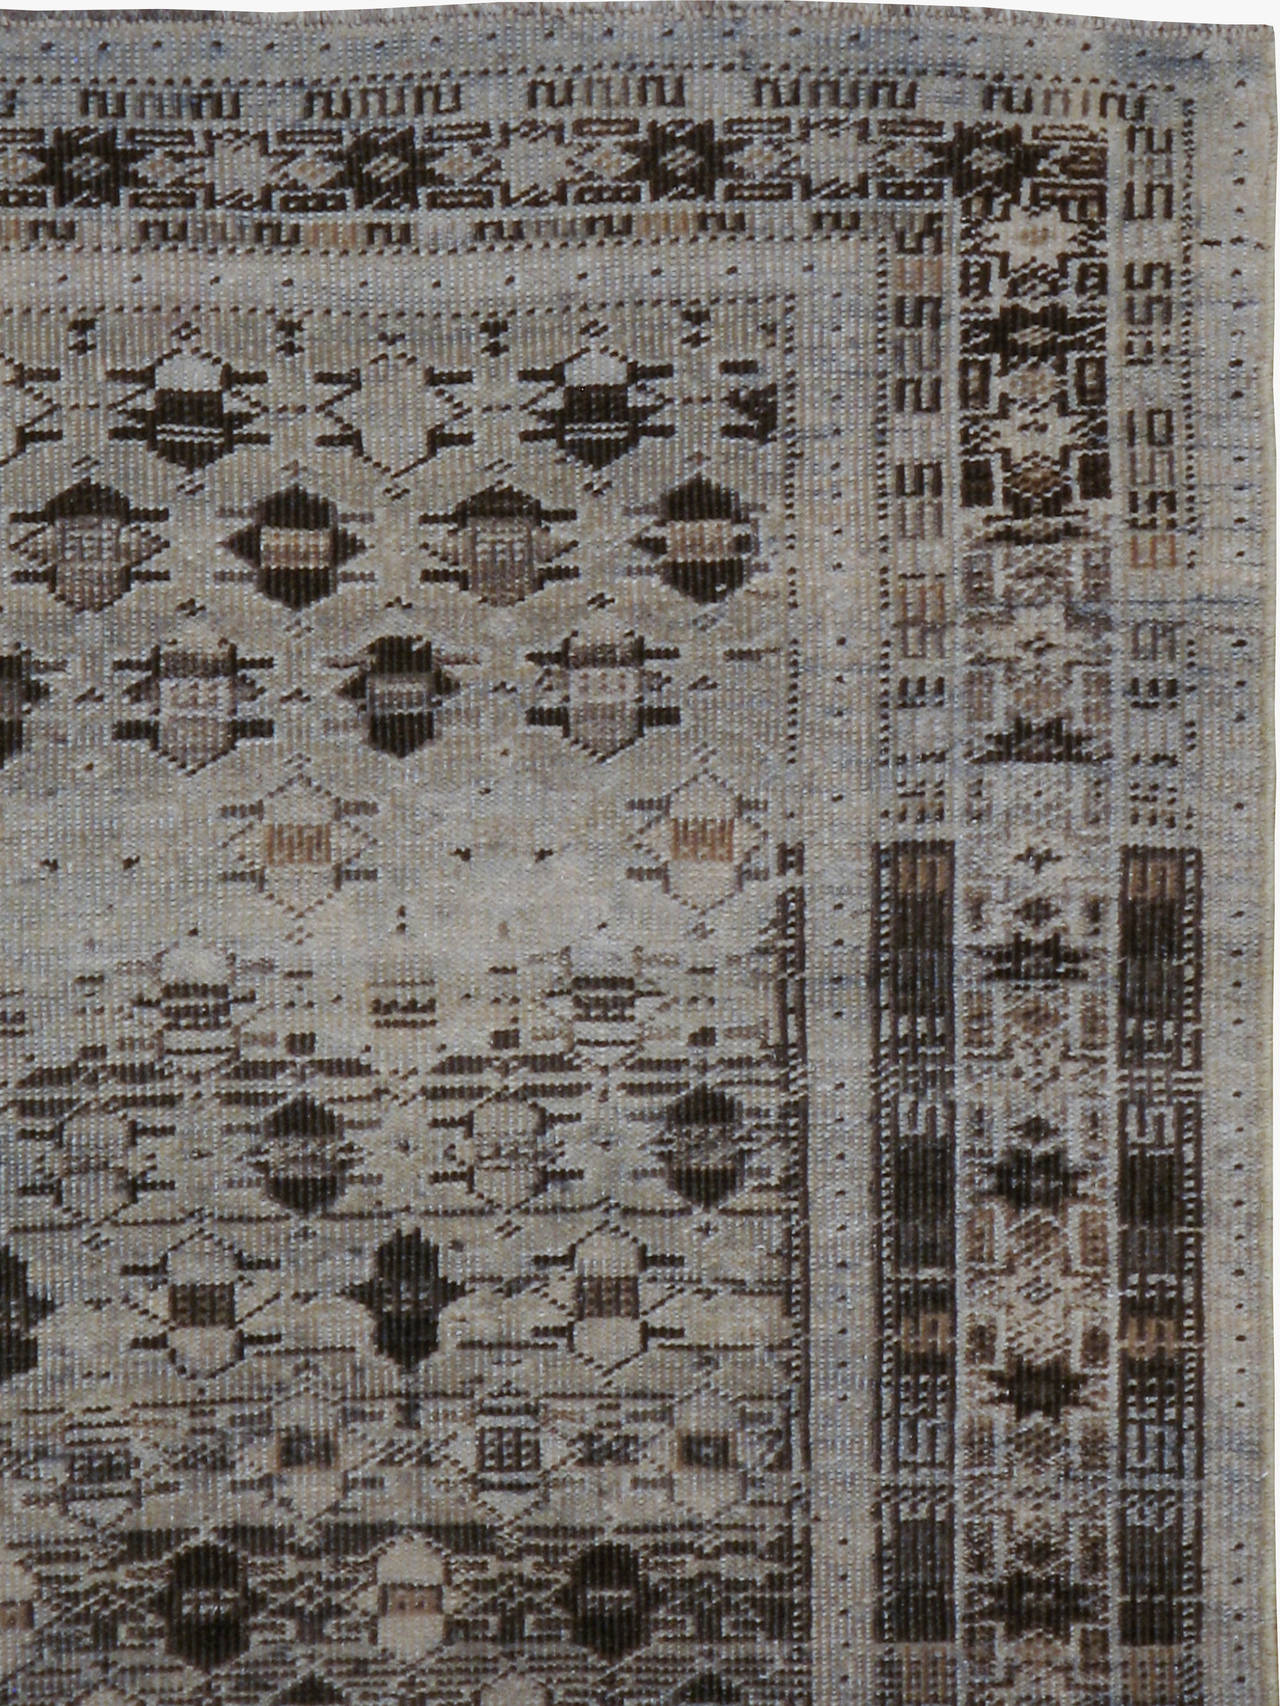 An antique Persian Baluch rug from the second quarter of the 20th century.